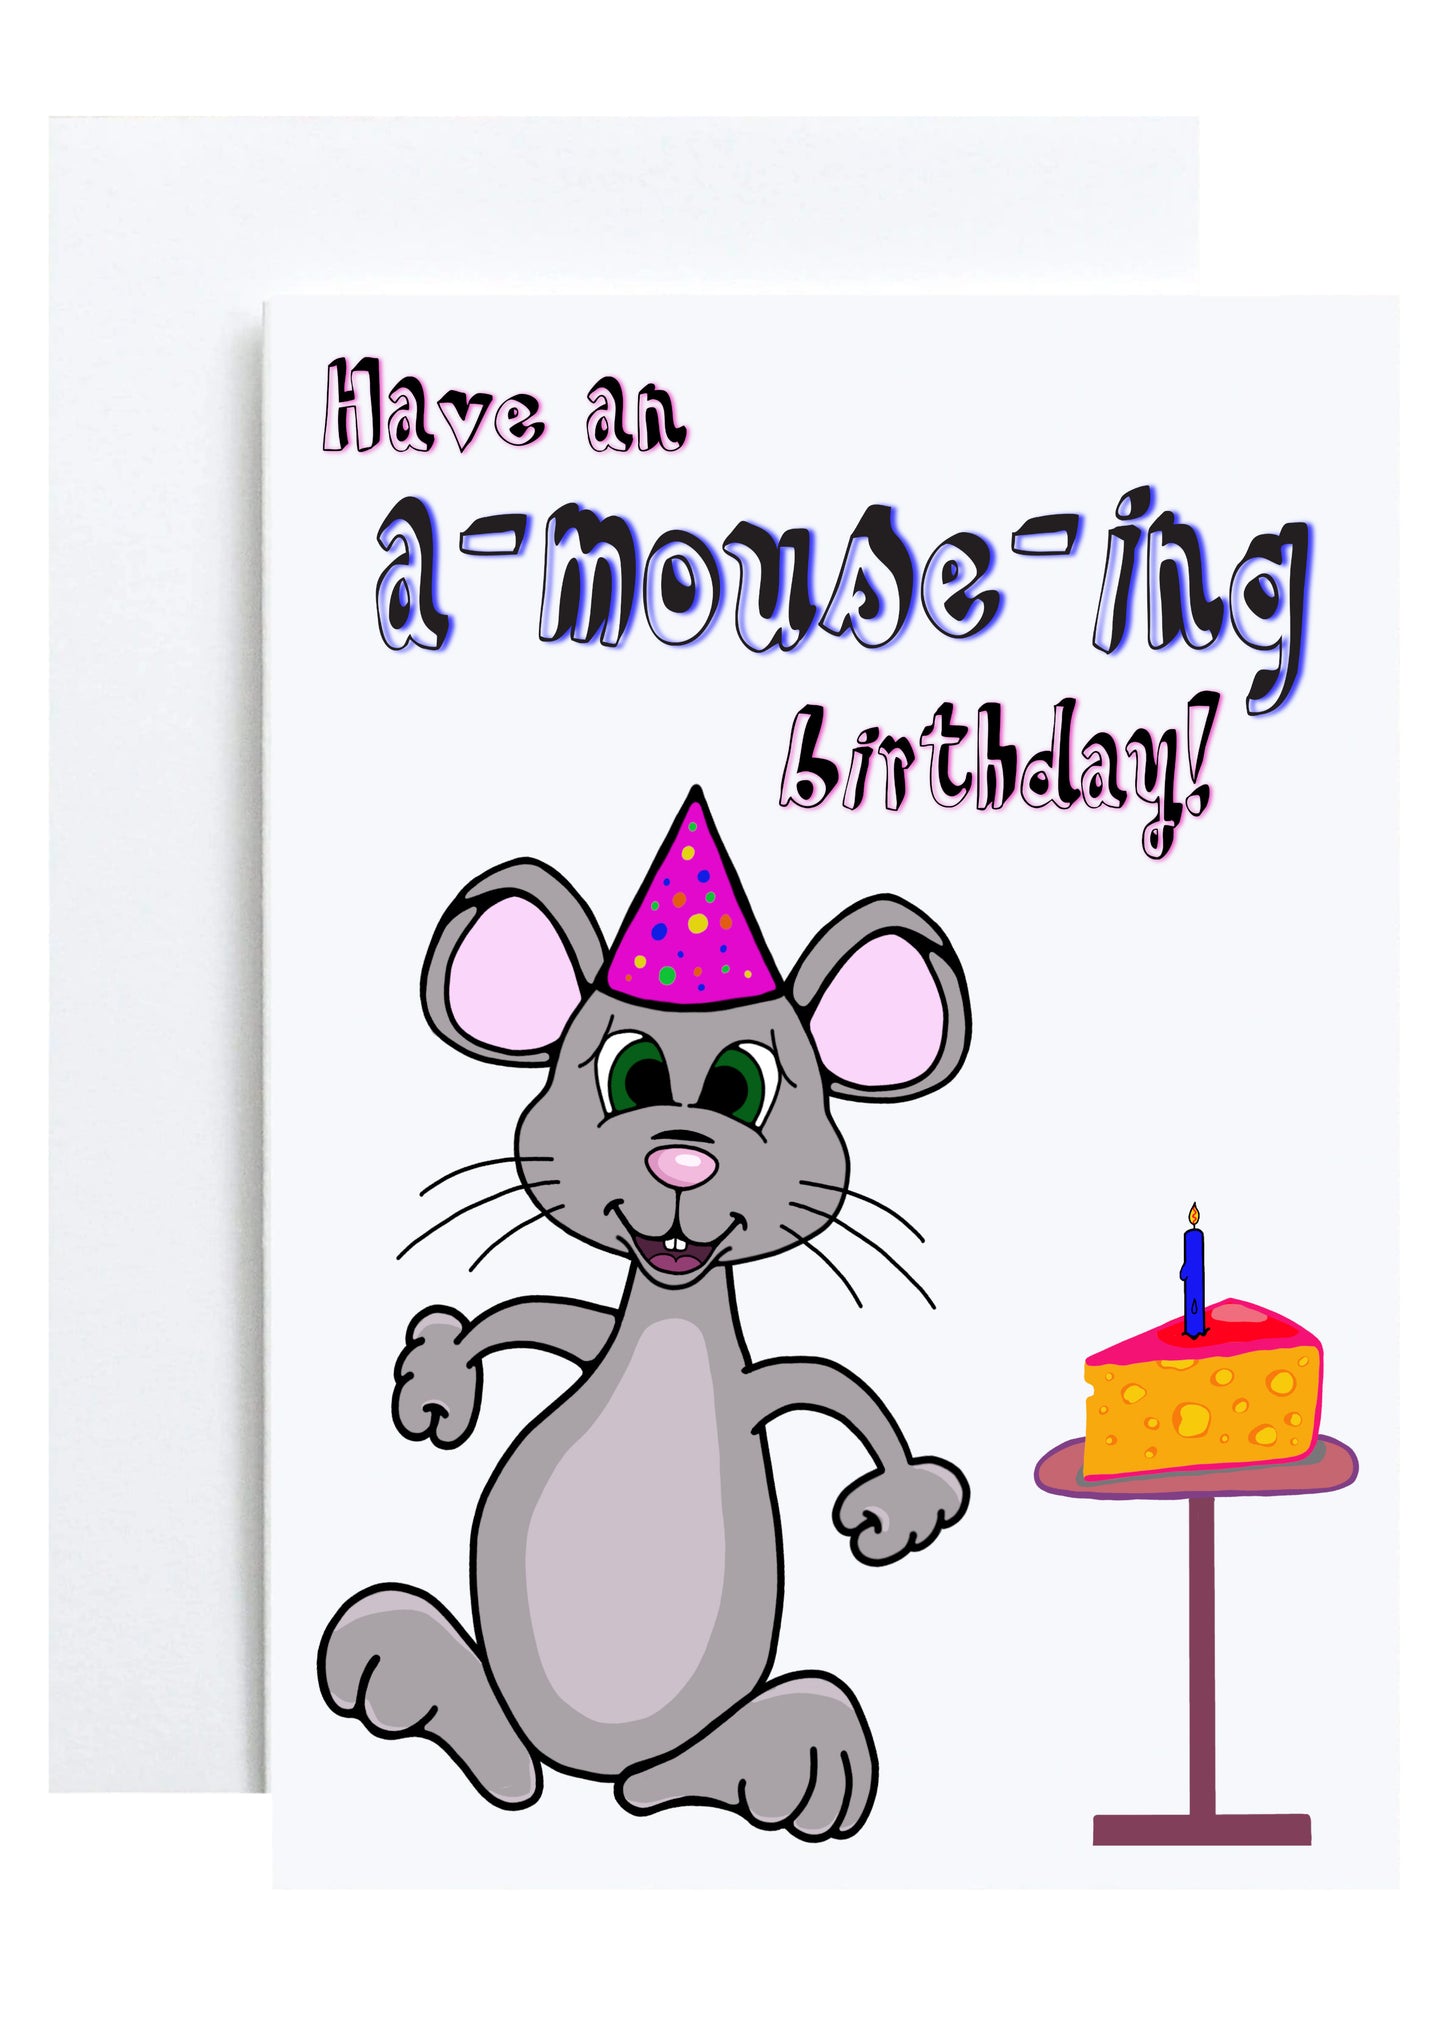 "A-mouse-ing Birthday" Greeting Card (Birthday)